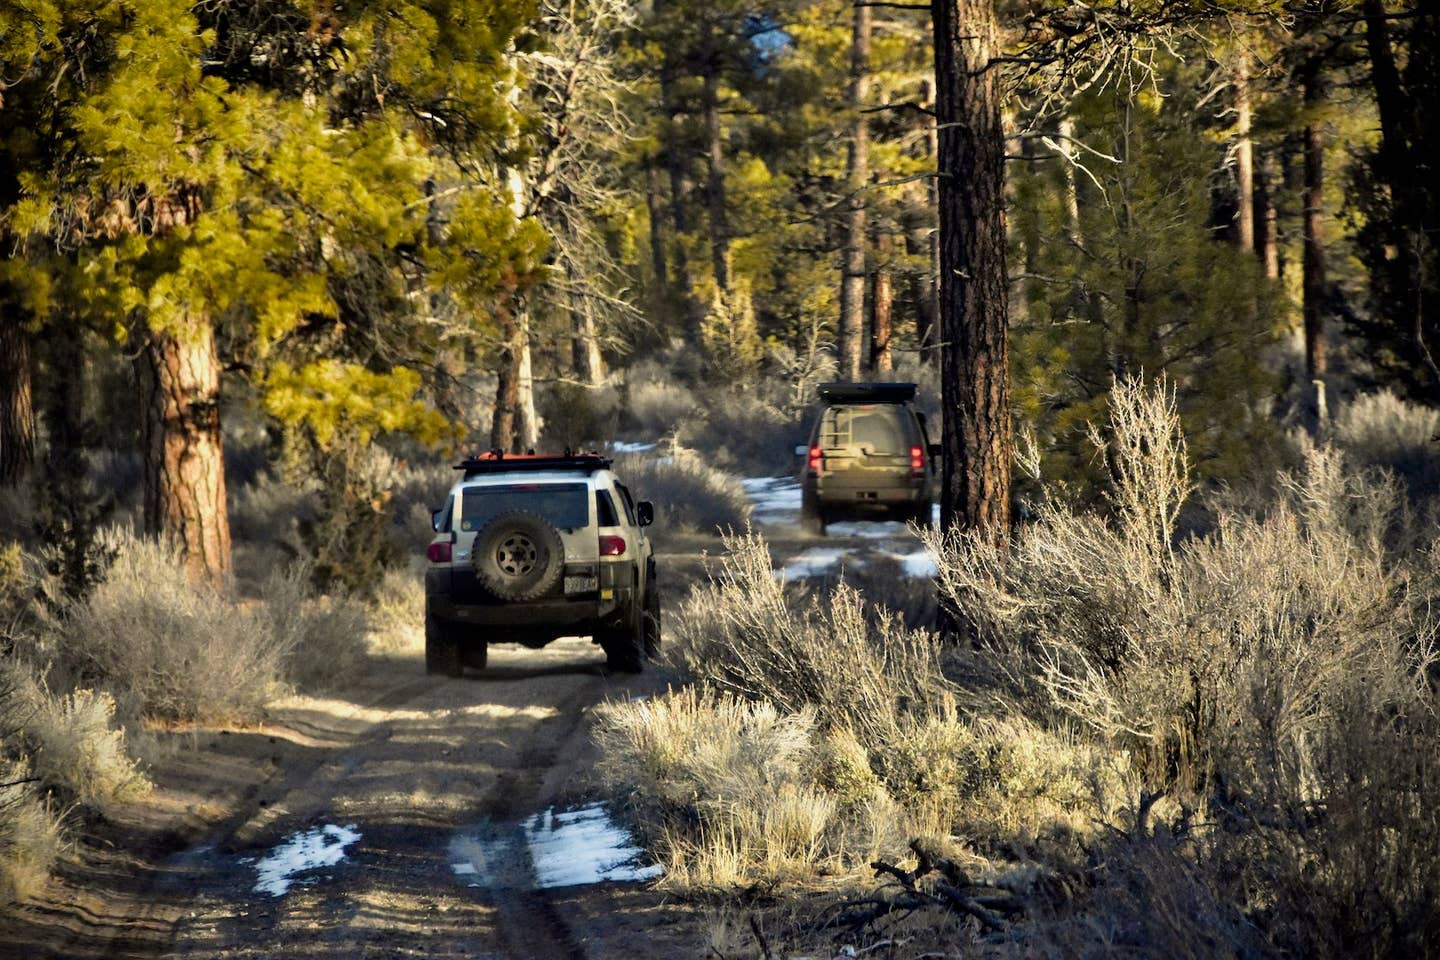 A Toyota FJ Cruiser and Land Rover LR3 travel through a forest at sunset